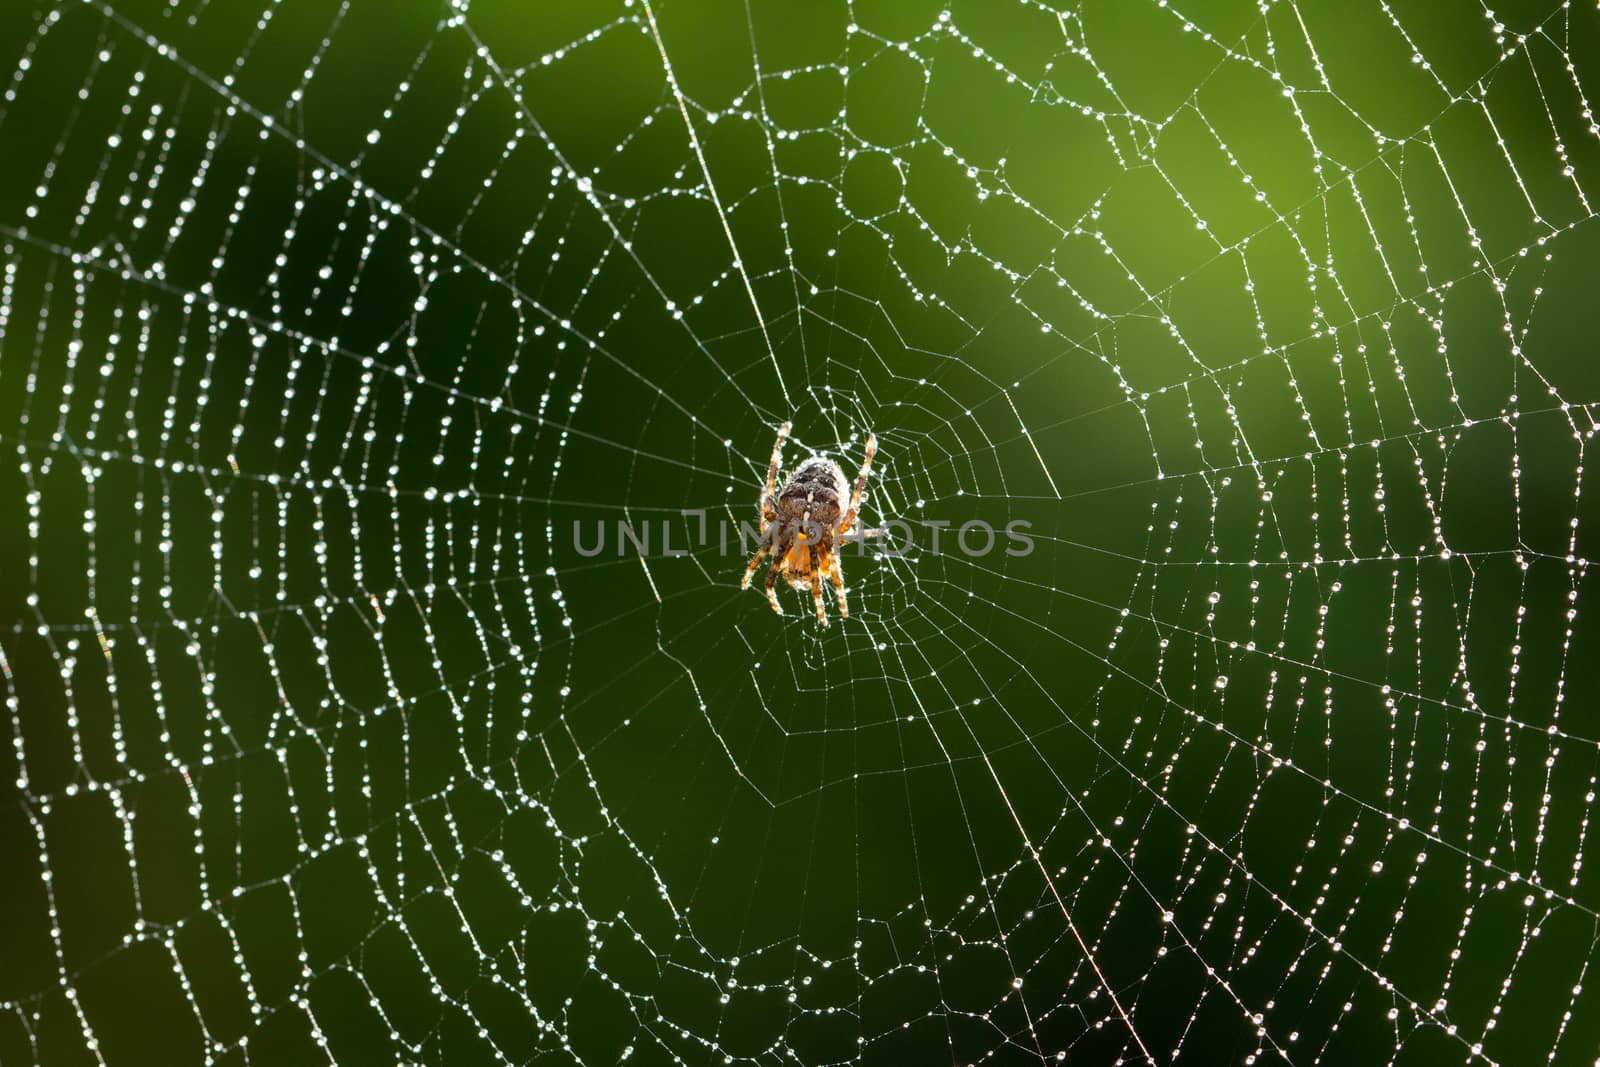 Spider On a Wet Web by magicbones